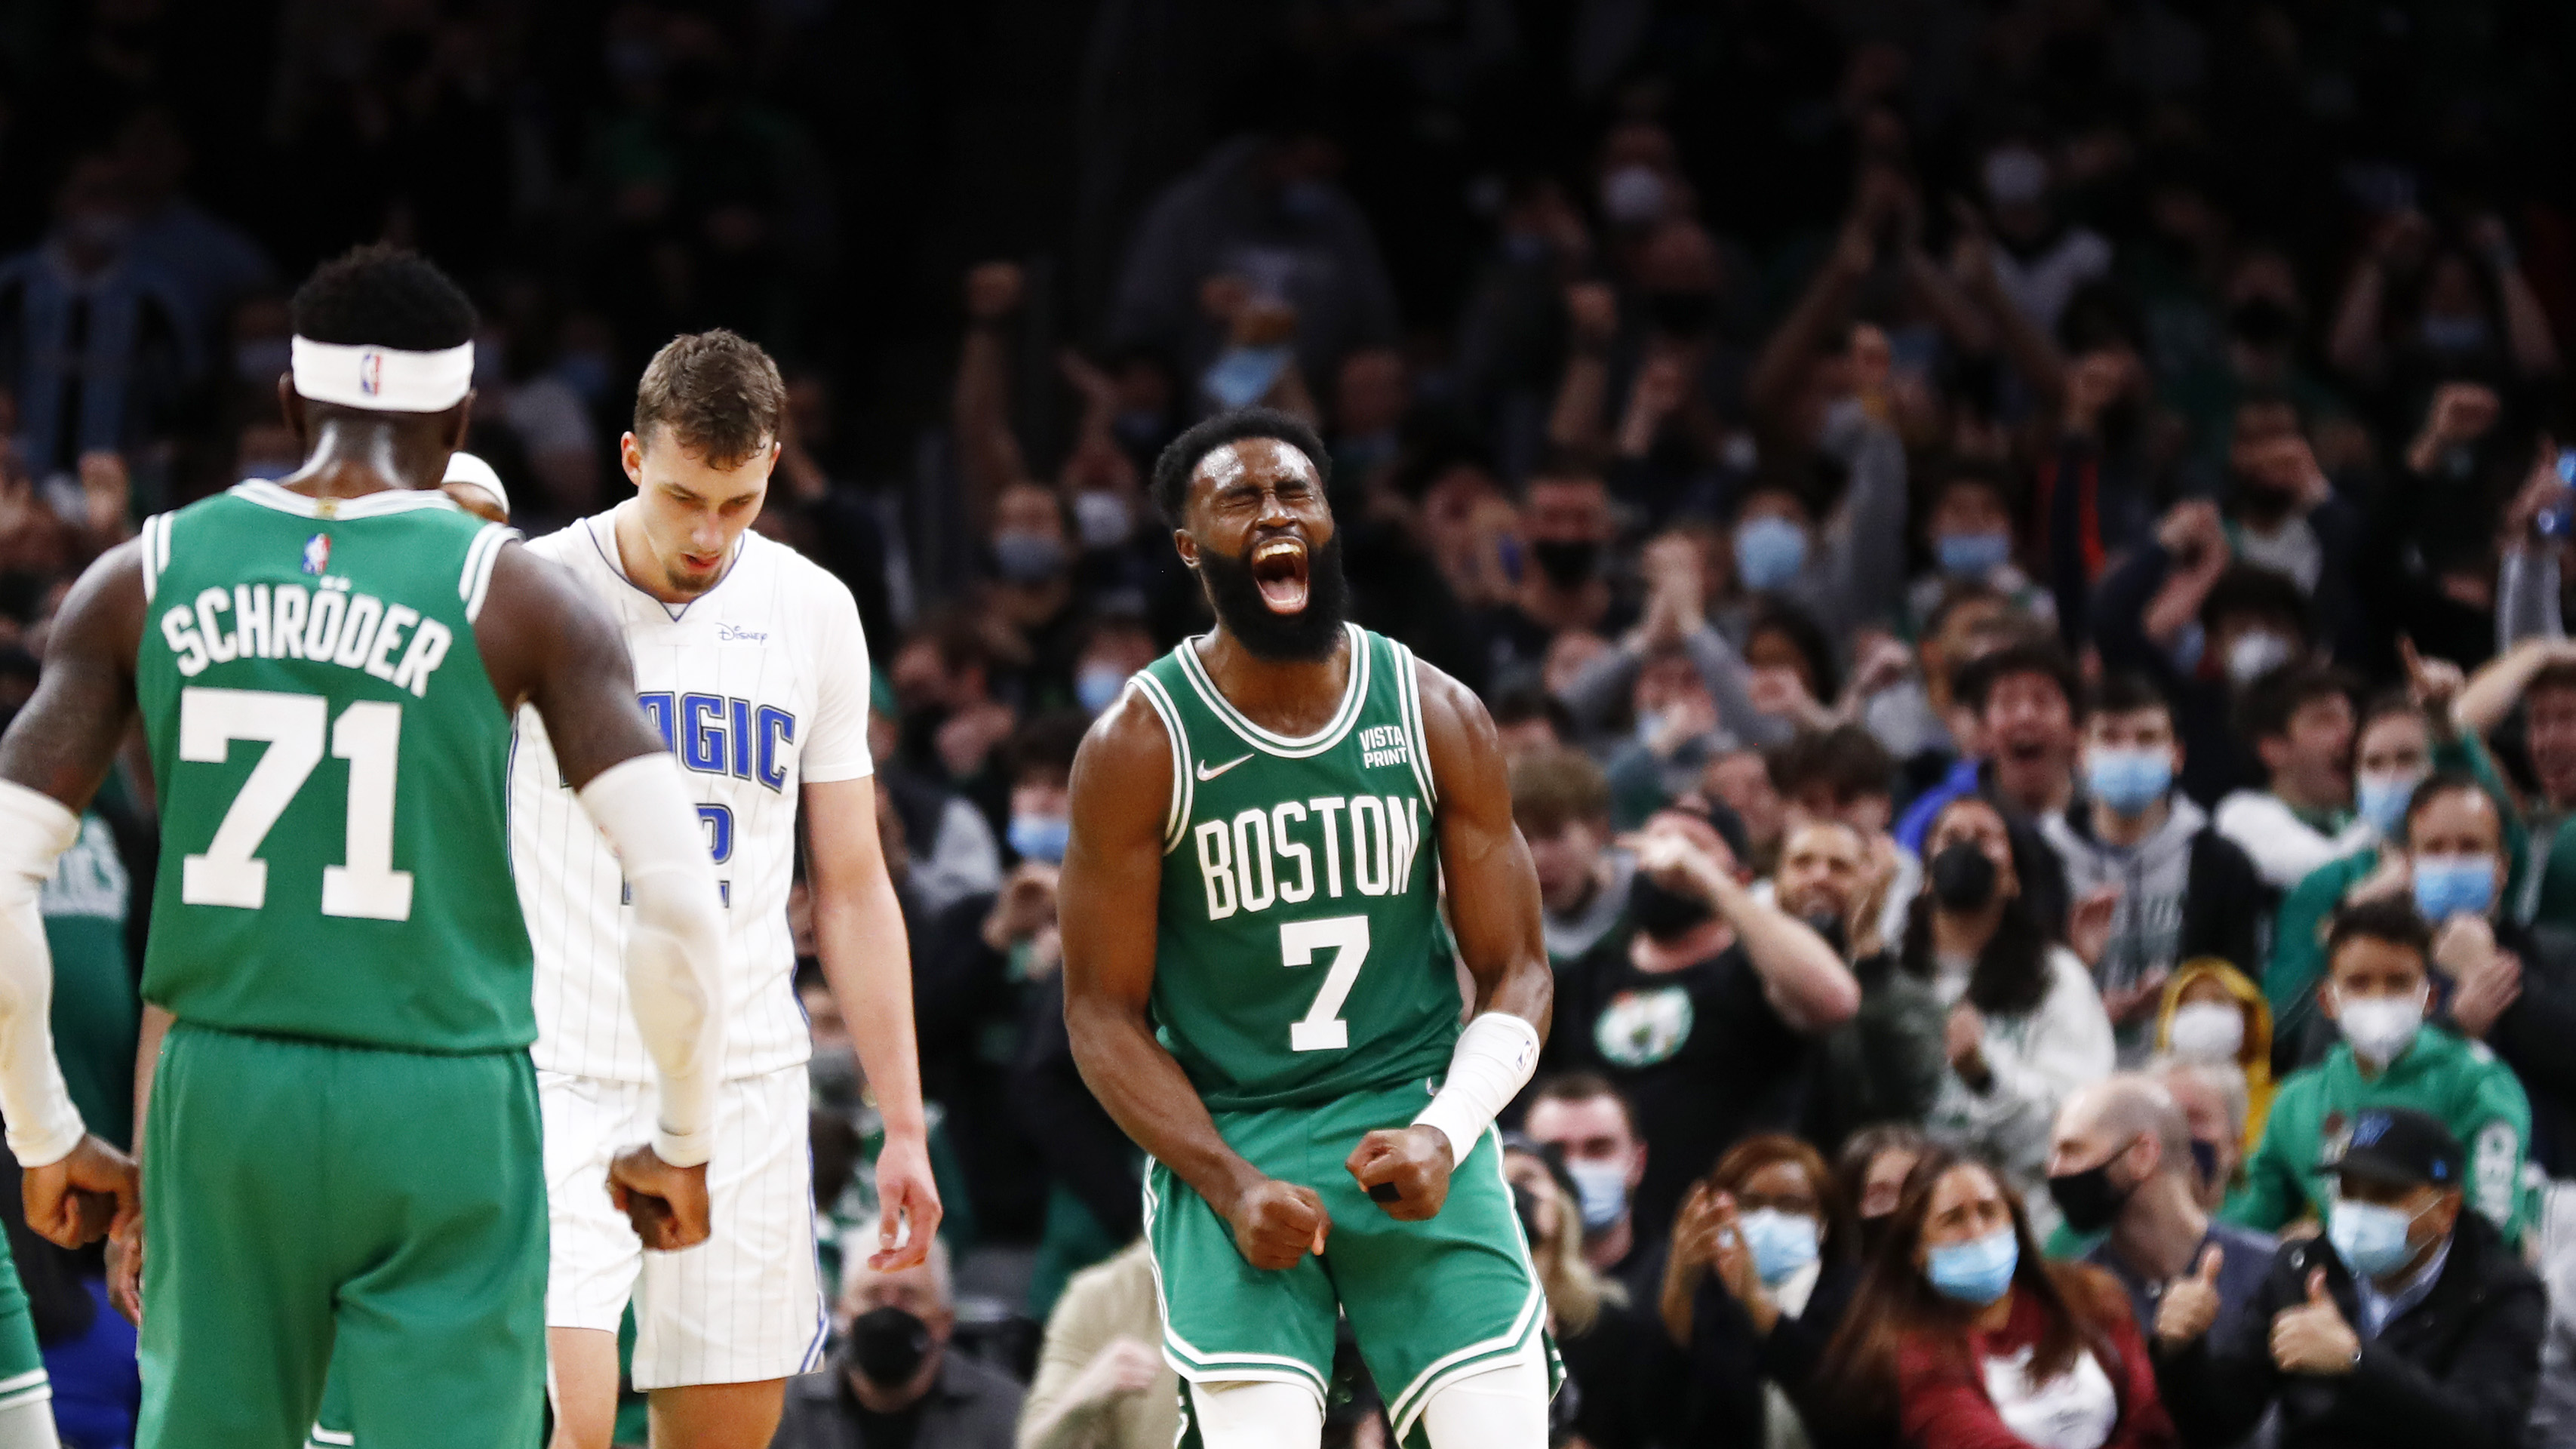 Boston Celtics star Jaylen Brown reacts after an overtime basket against the Orlando Magic